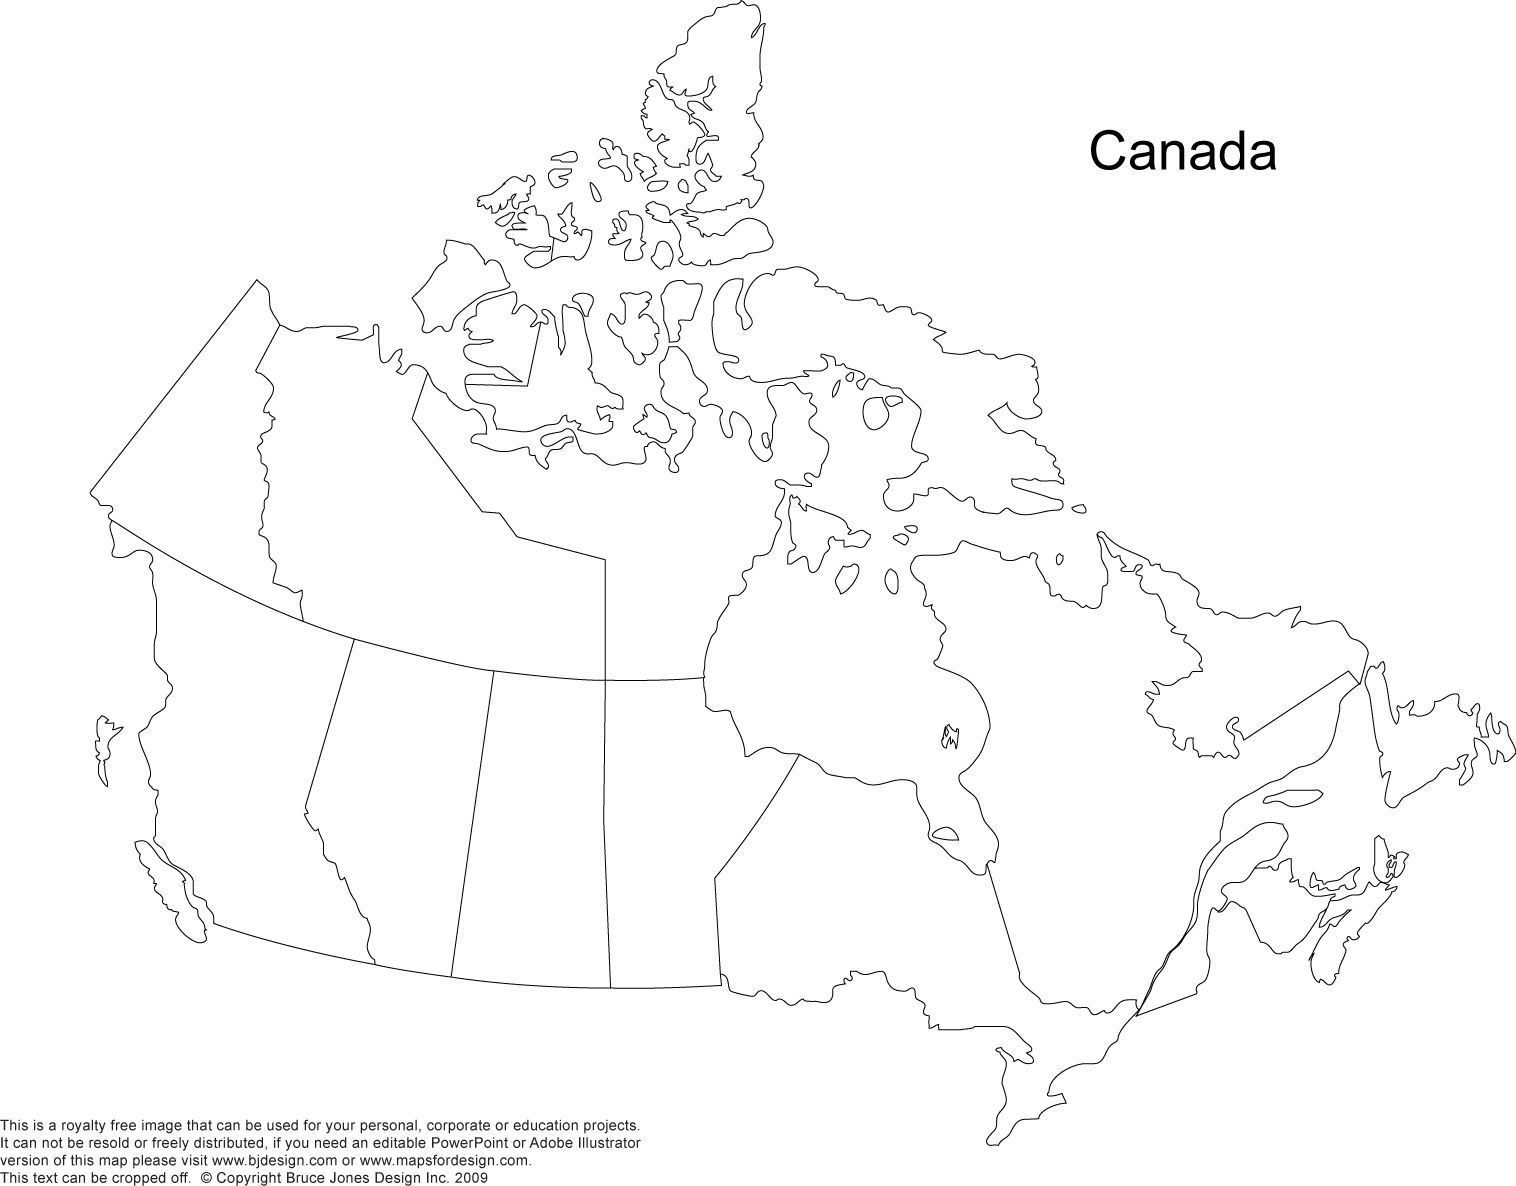 Pinkimberly Wallace On Classical Conversations- Cycle 1 - Printable Map Of Canada